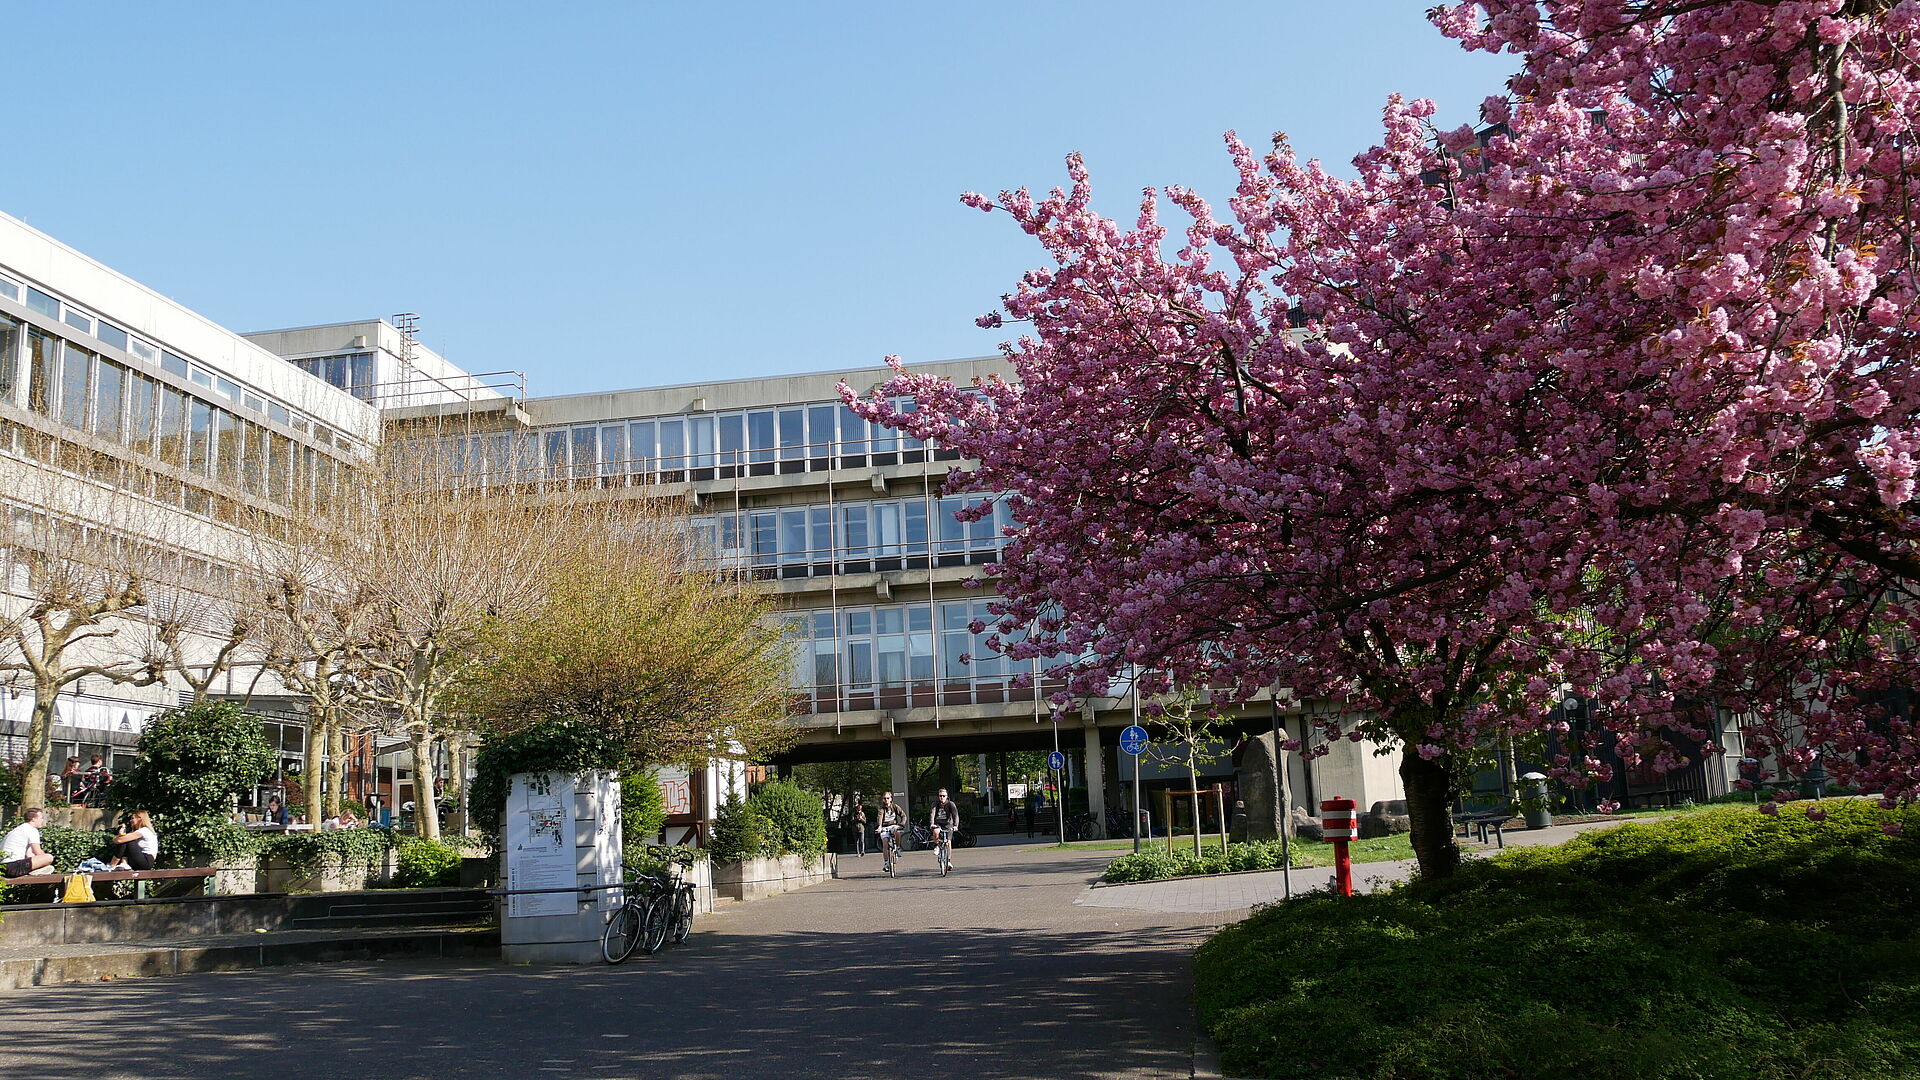 Blossoming cherry trees in front of Paderborn University.